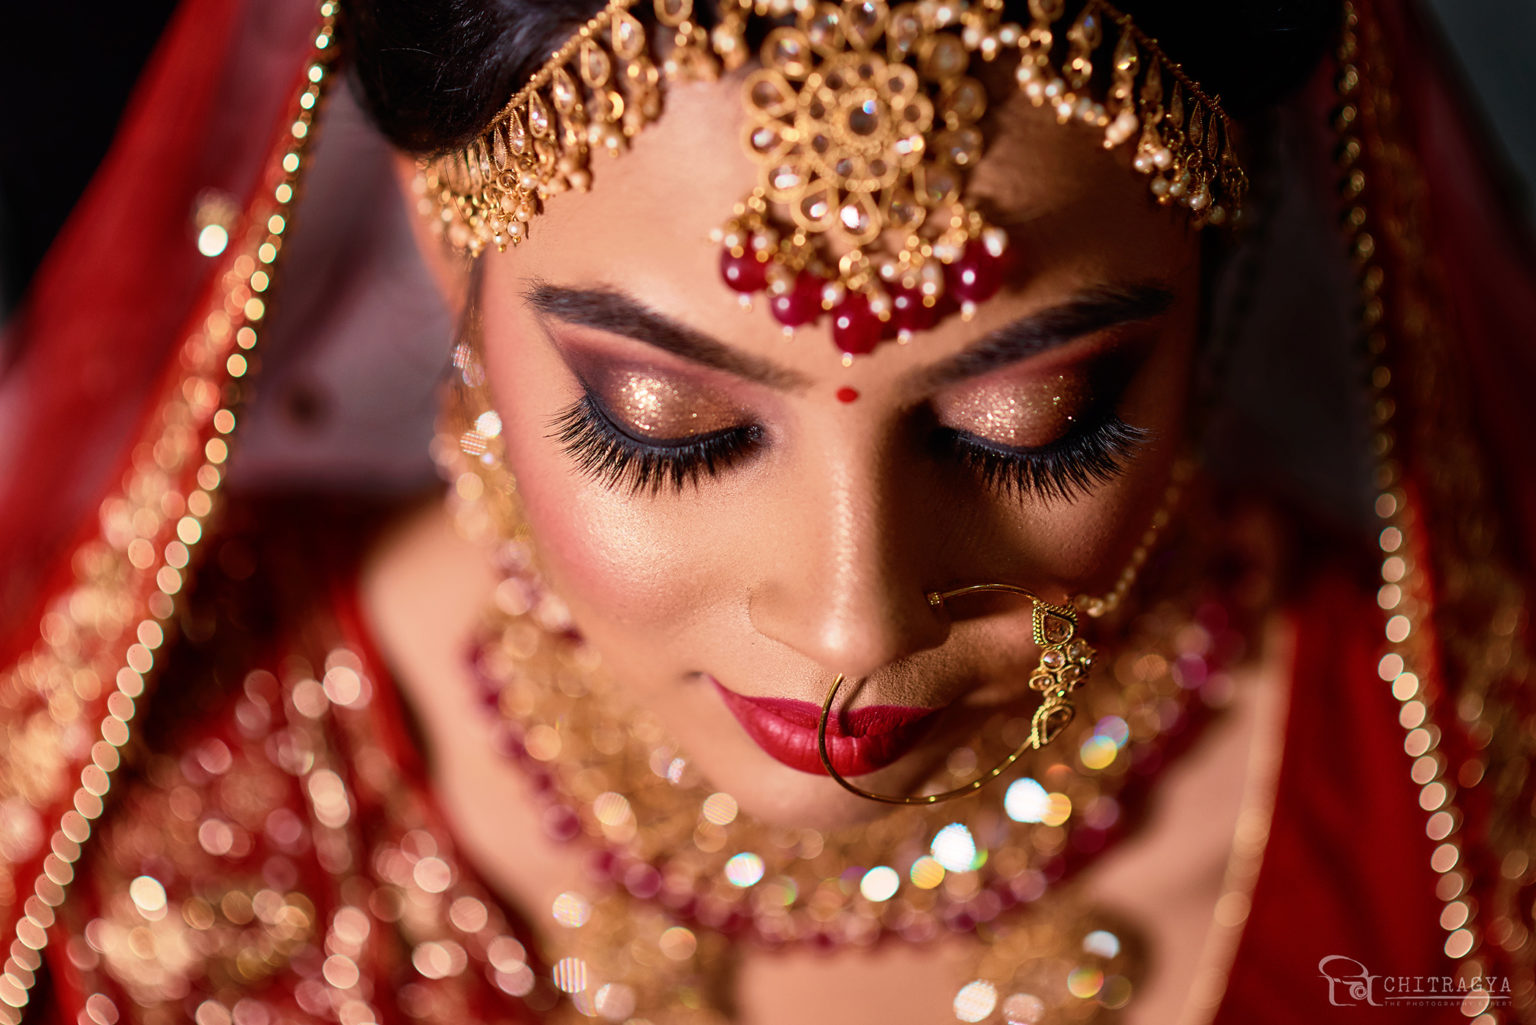 Chitragya - The Photography Expert Event Services | Photographer